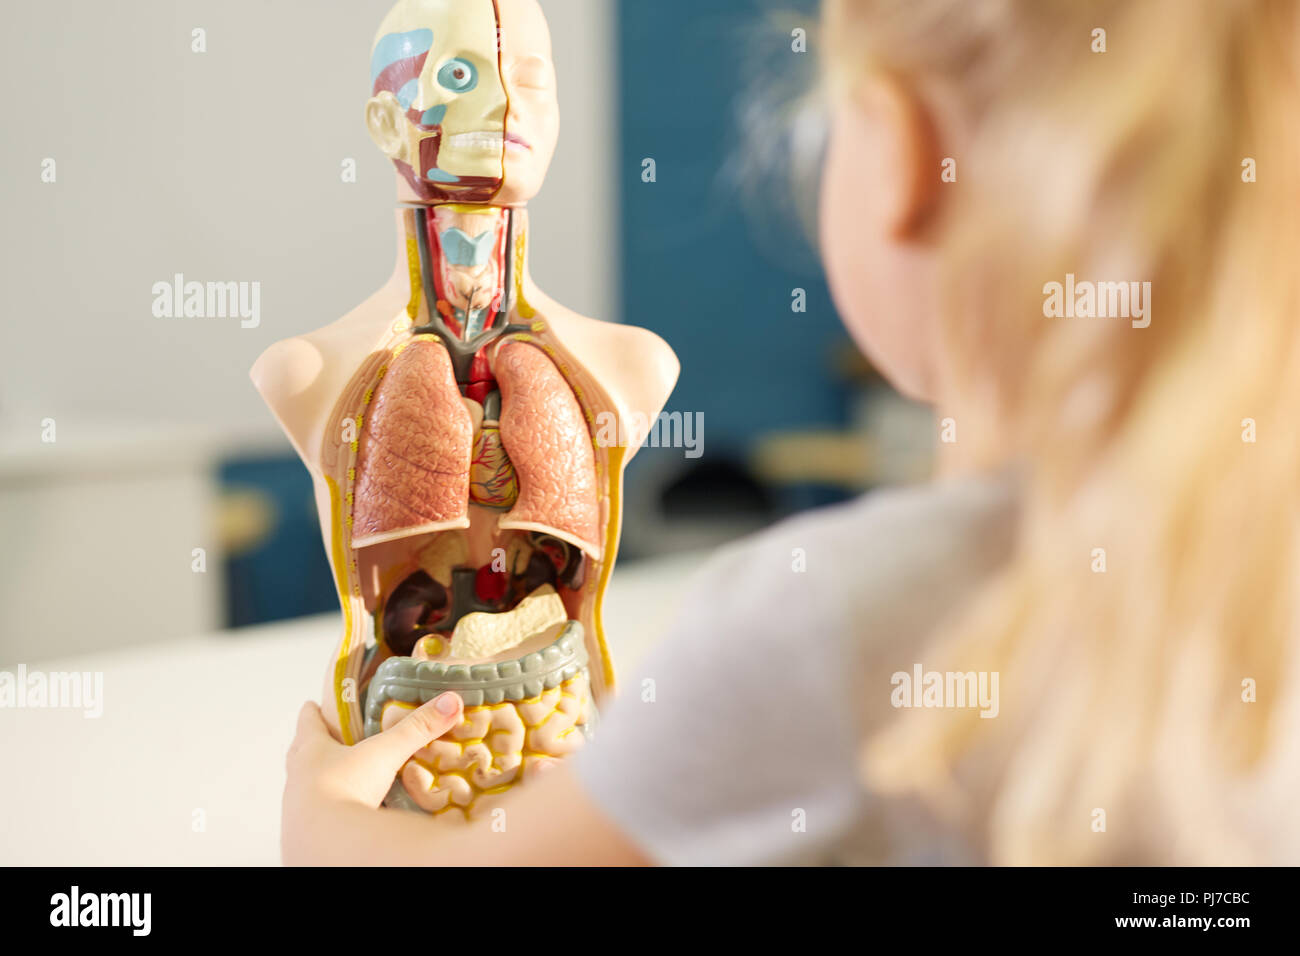 Curious schoolgirl looking at anatomical model Stock Photo